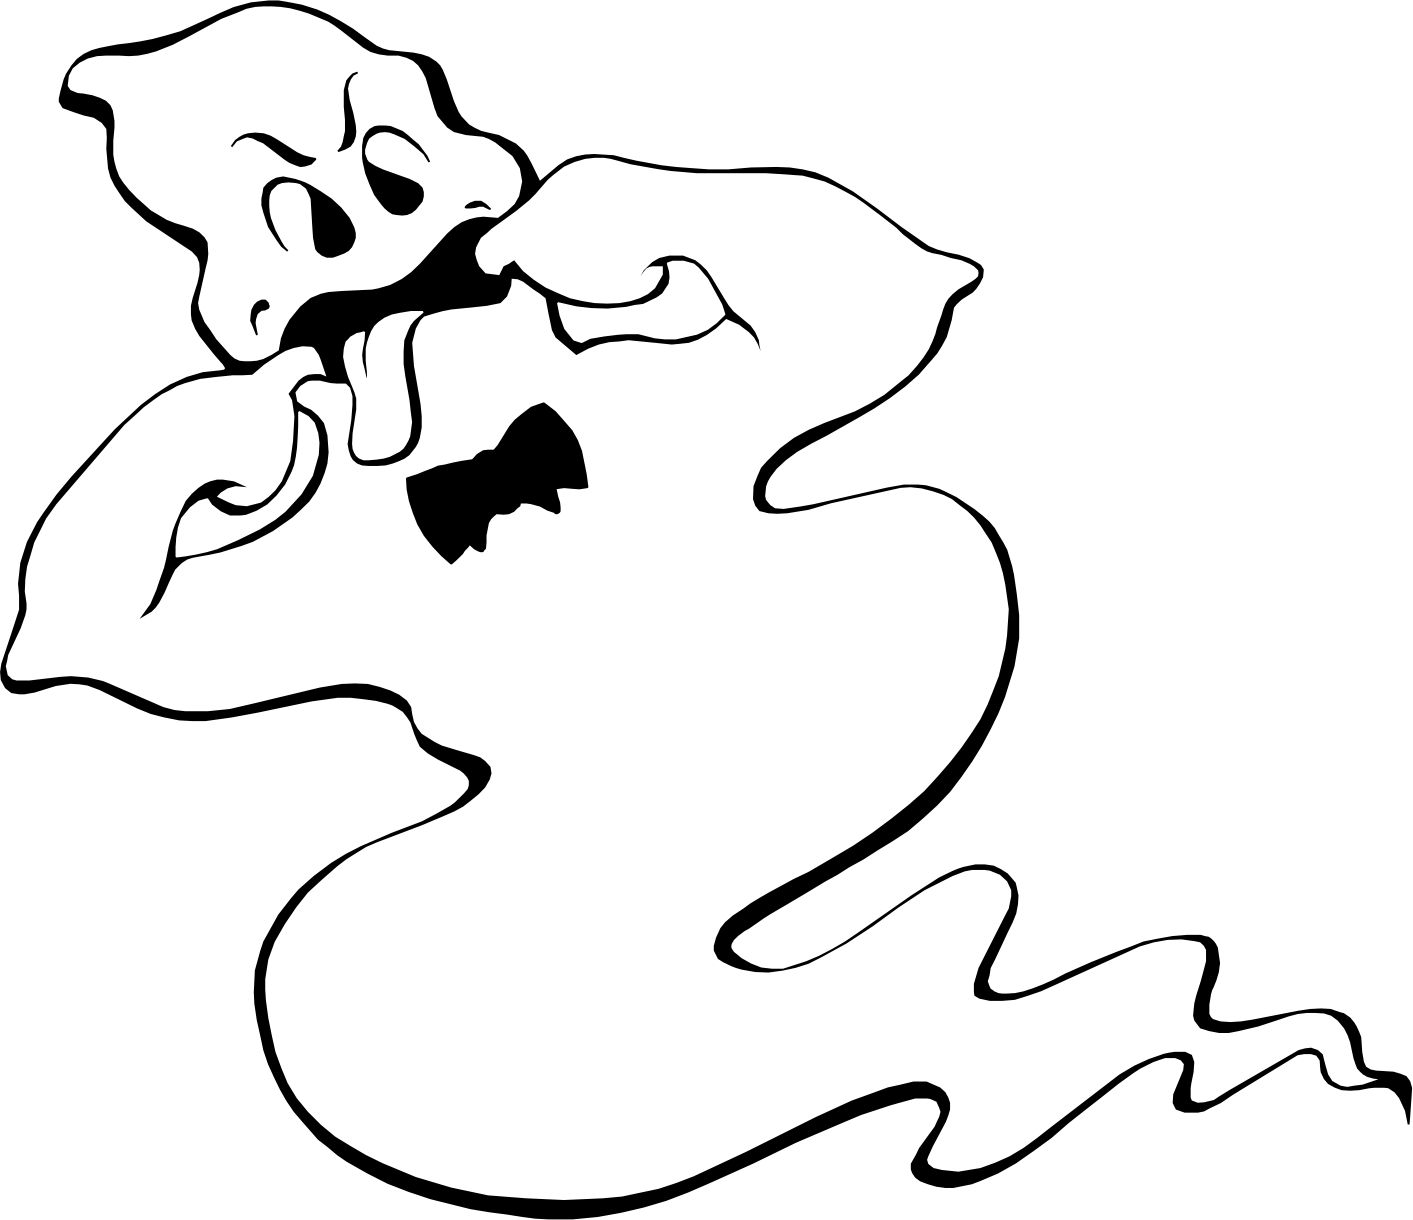 Ghost clipart cool. Free cliparts download clip